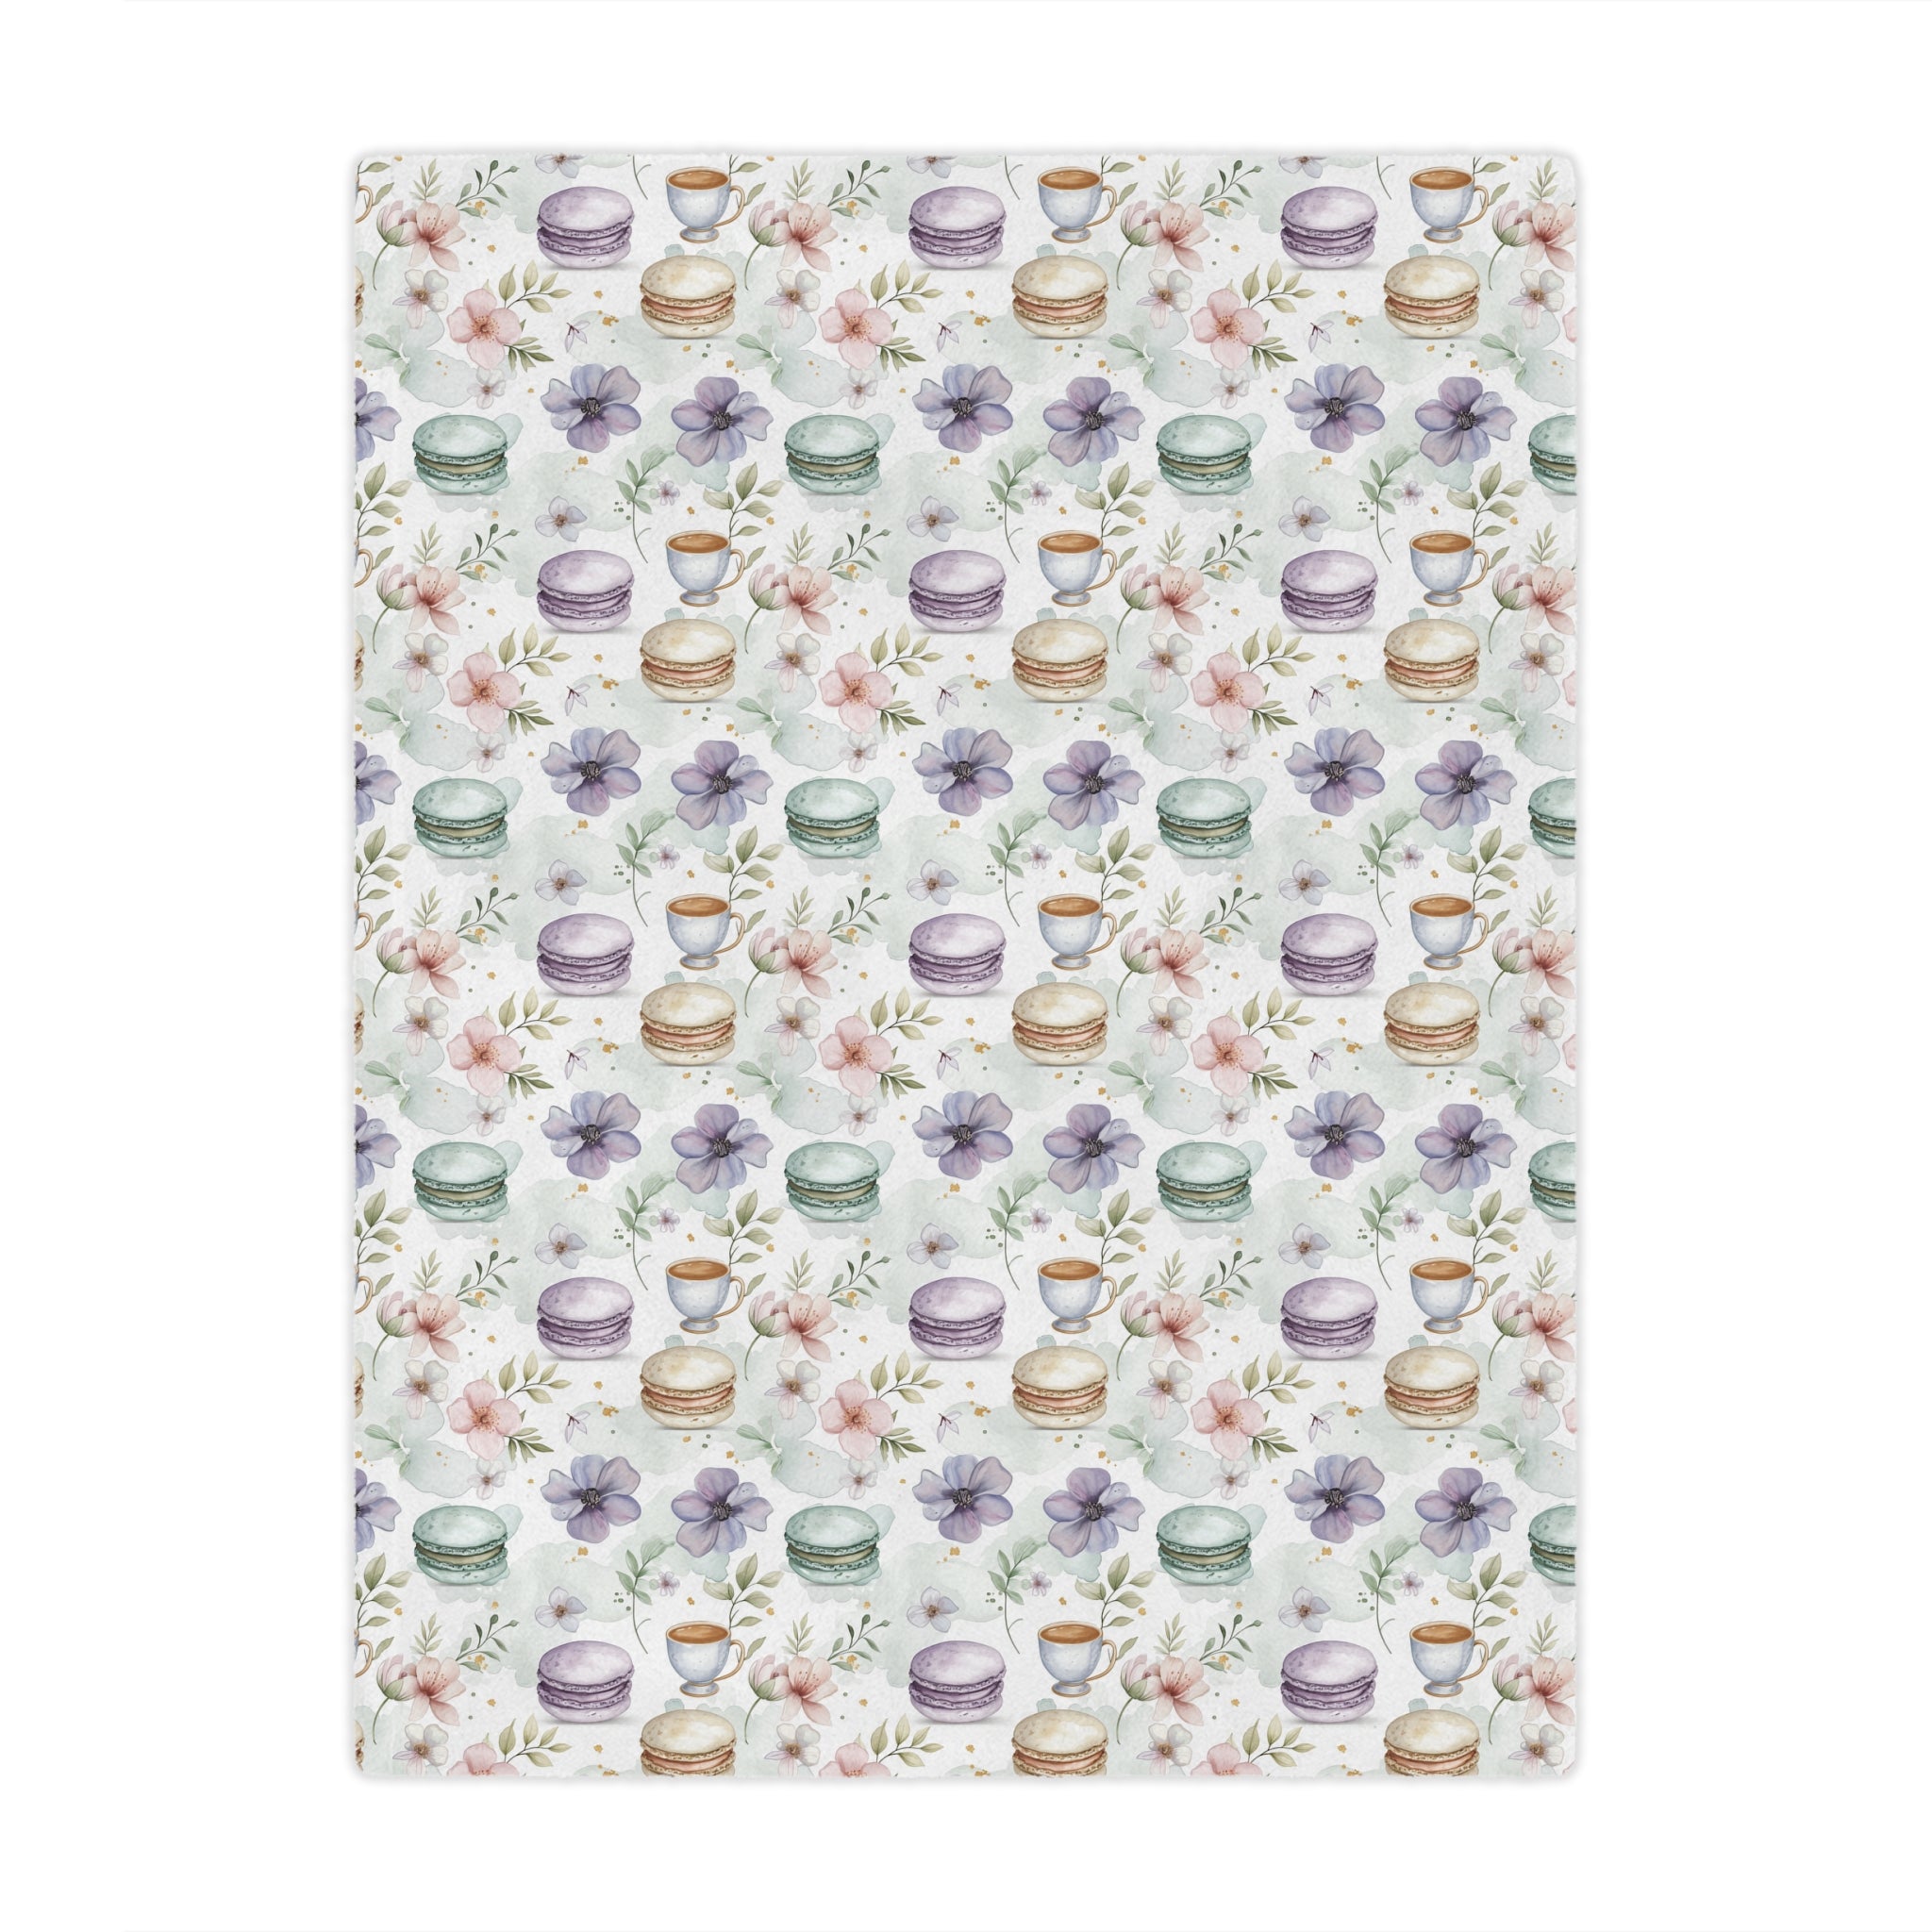 Cozy Up in Sweet Style: Macaroon Rain and Tea Pattern Cute Microfiber Blanket For Pastry Lovers and Foodies With a Sense of Humor and Style